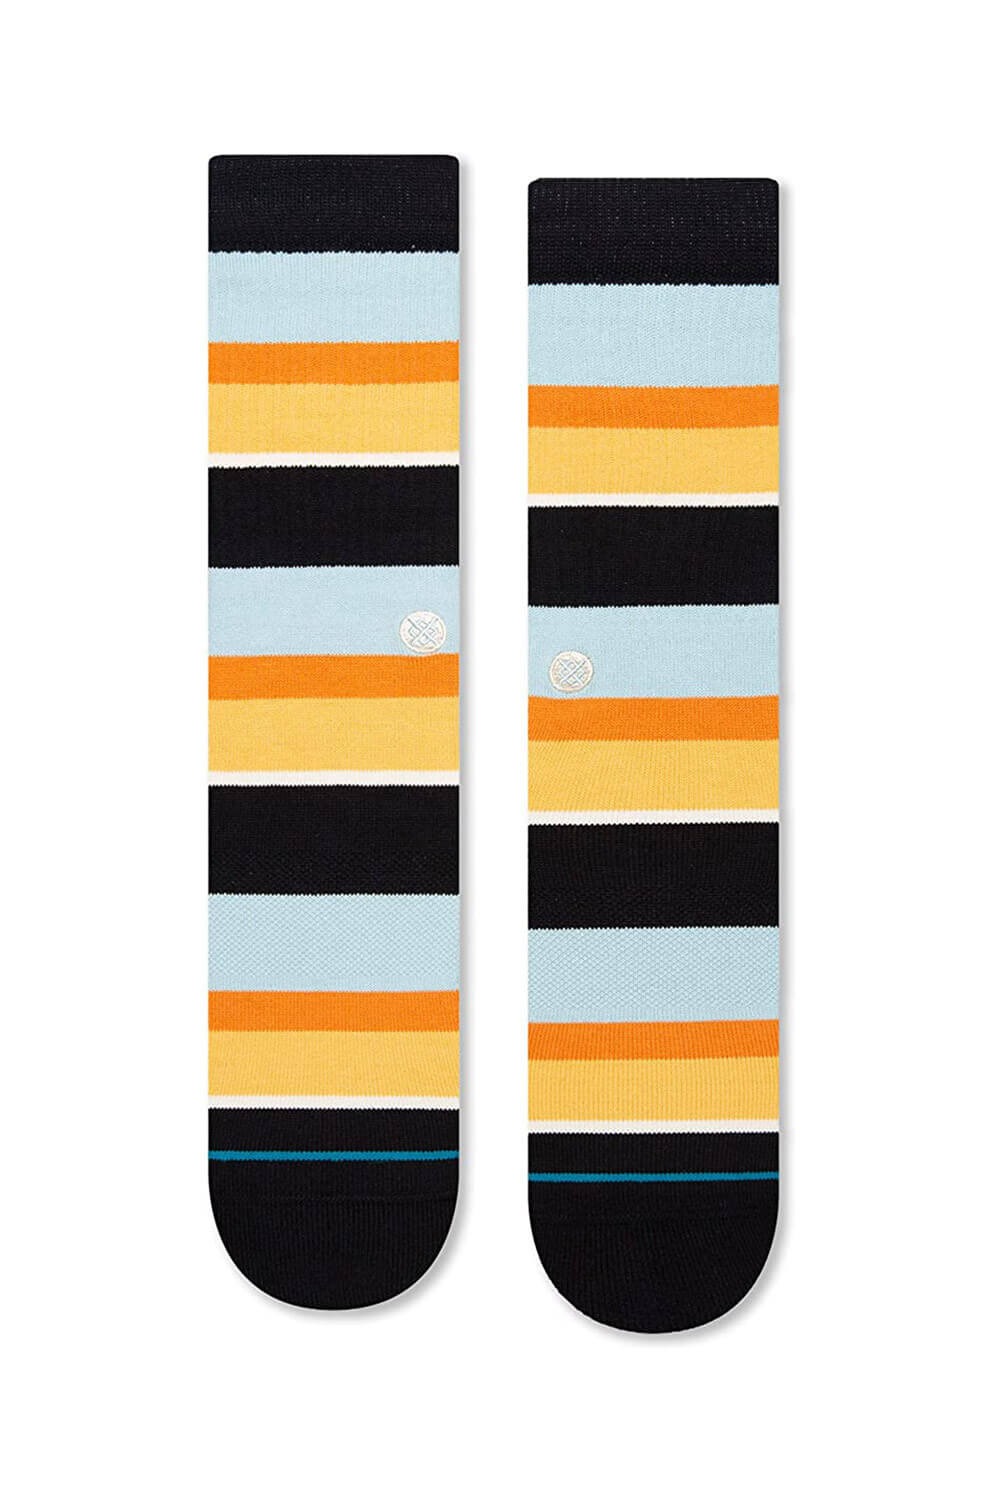 Stance Canyonland Crew Socks for Men in Multicolor